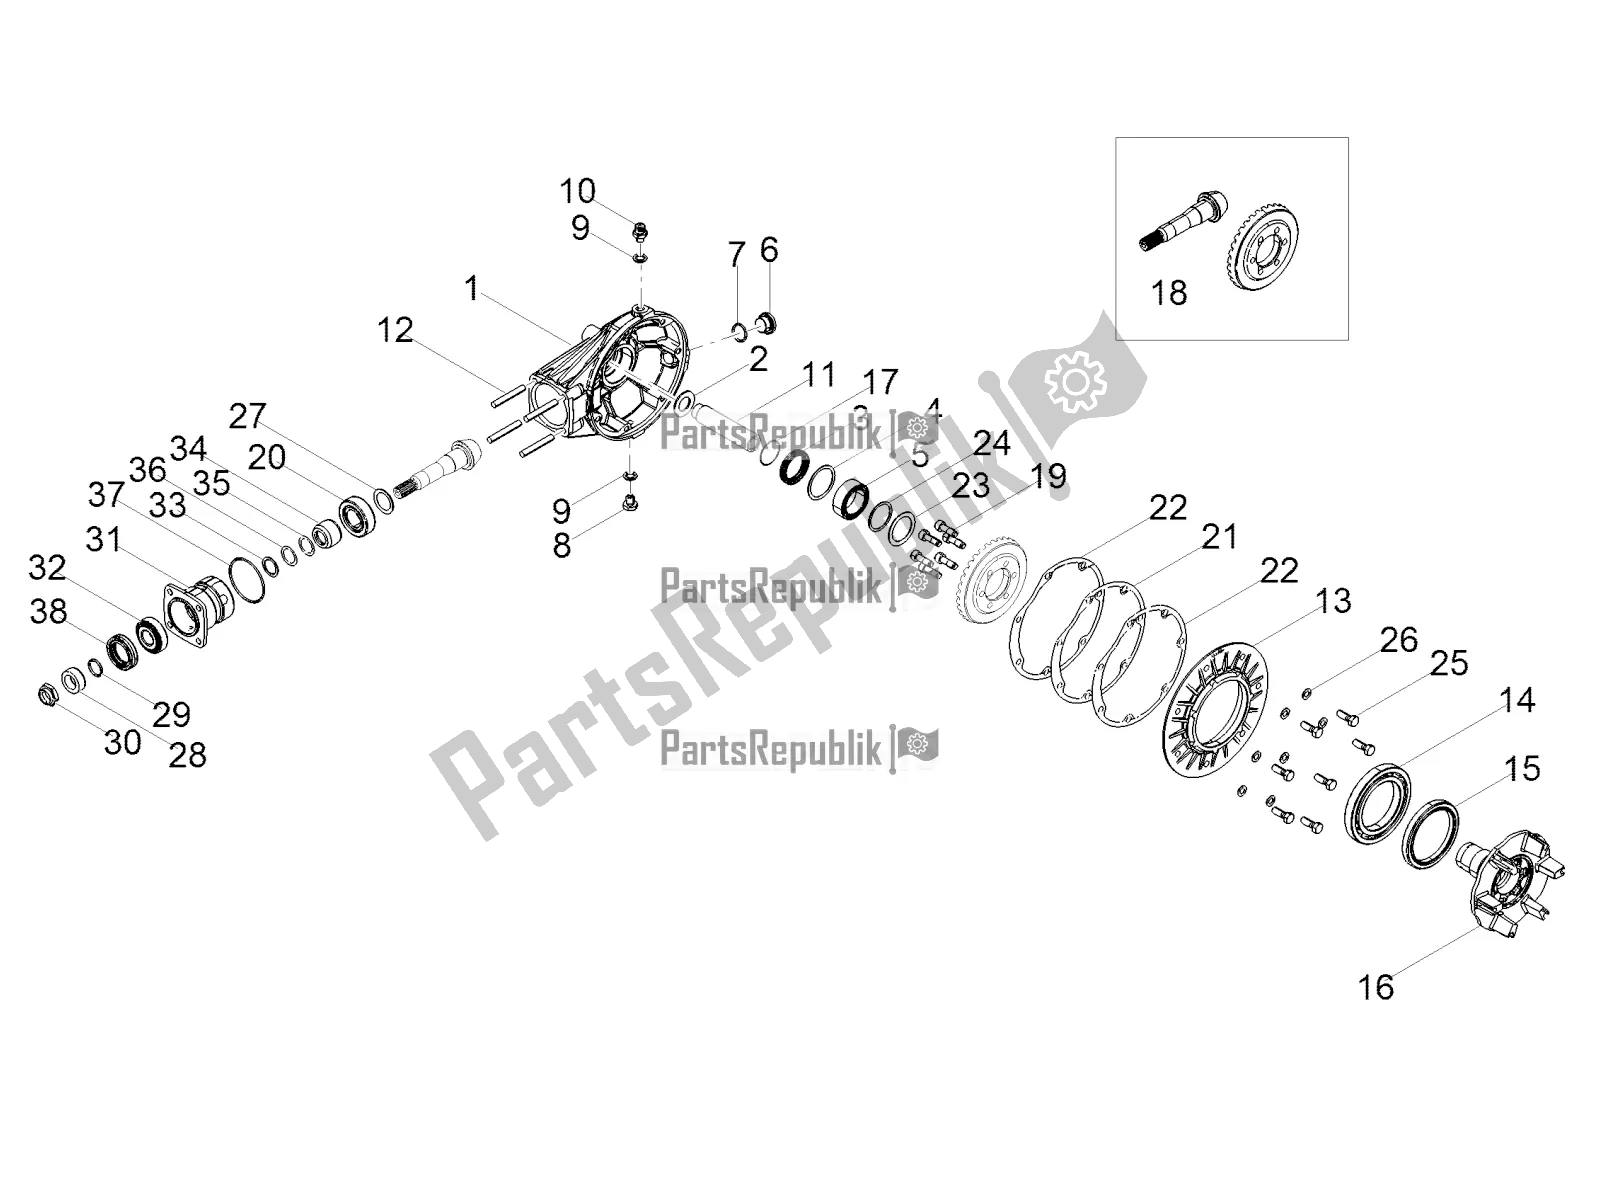 All parts for the Rear Transmission / Components of the Moto-Guzzi V7 III Special 750 Apac 2021